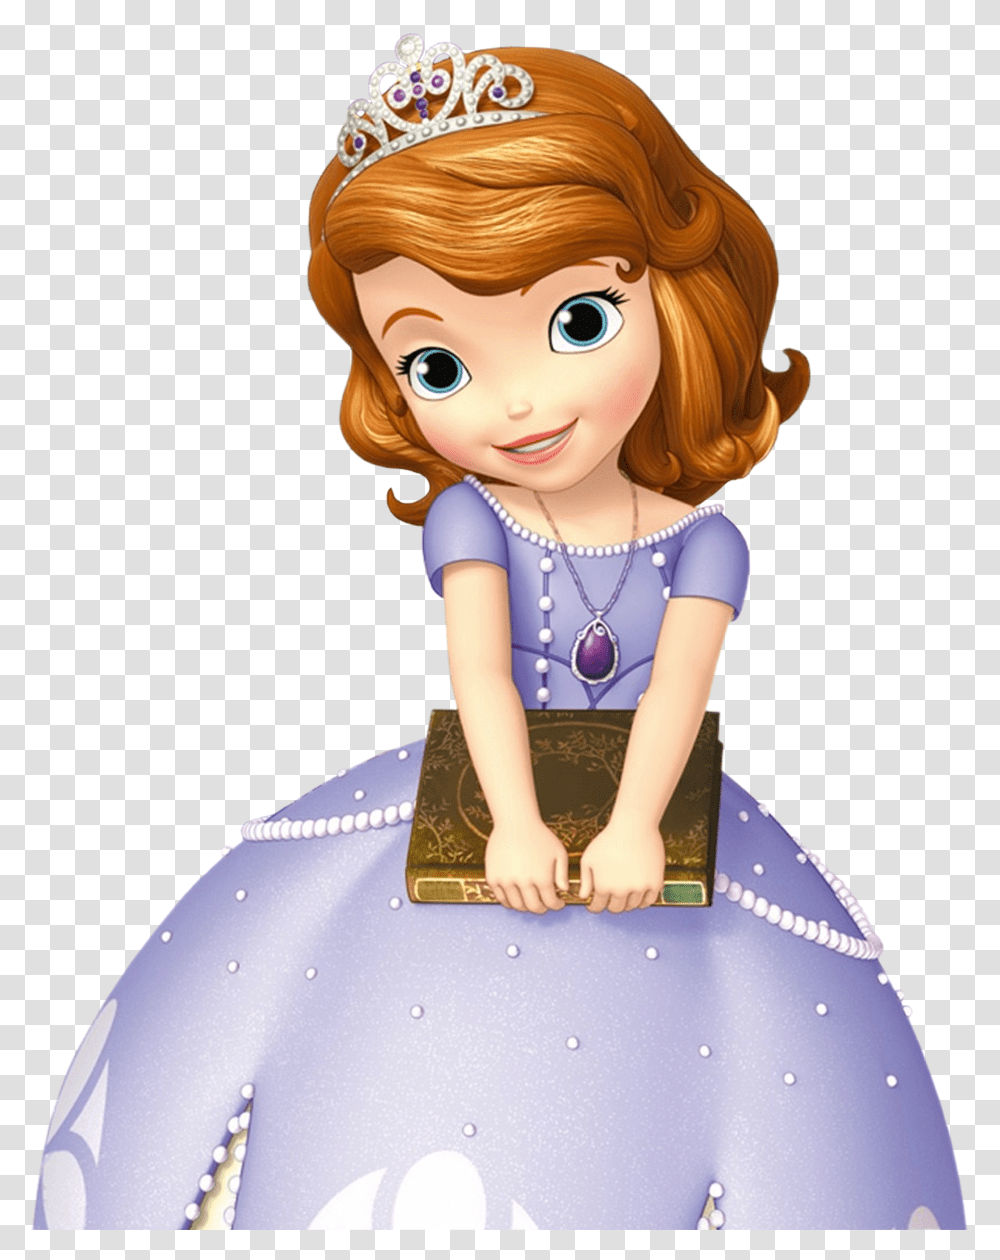 Princesa Sofia Princesa Sofia Prinzessin Sofia Girls Birthday Cards, Doll, Toy, Barbie, Figurine Transparent Png